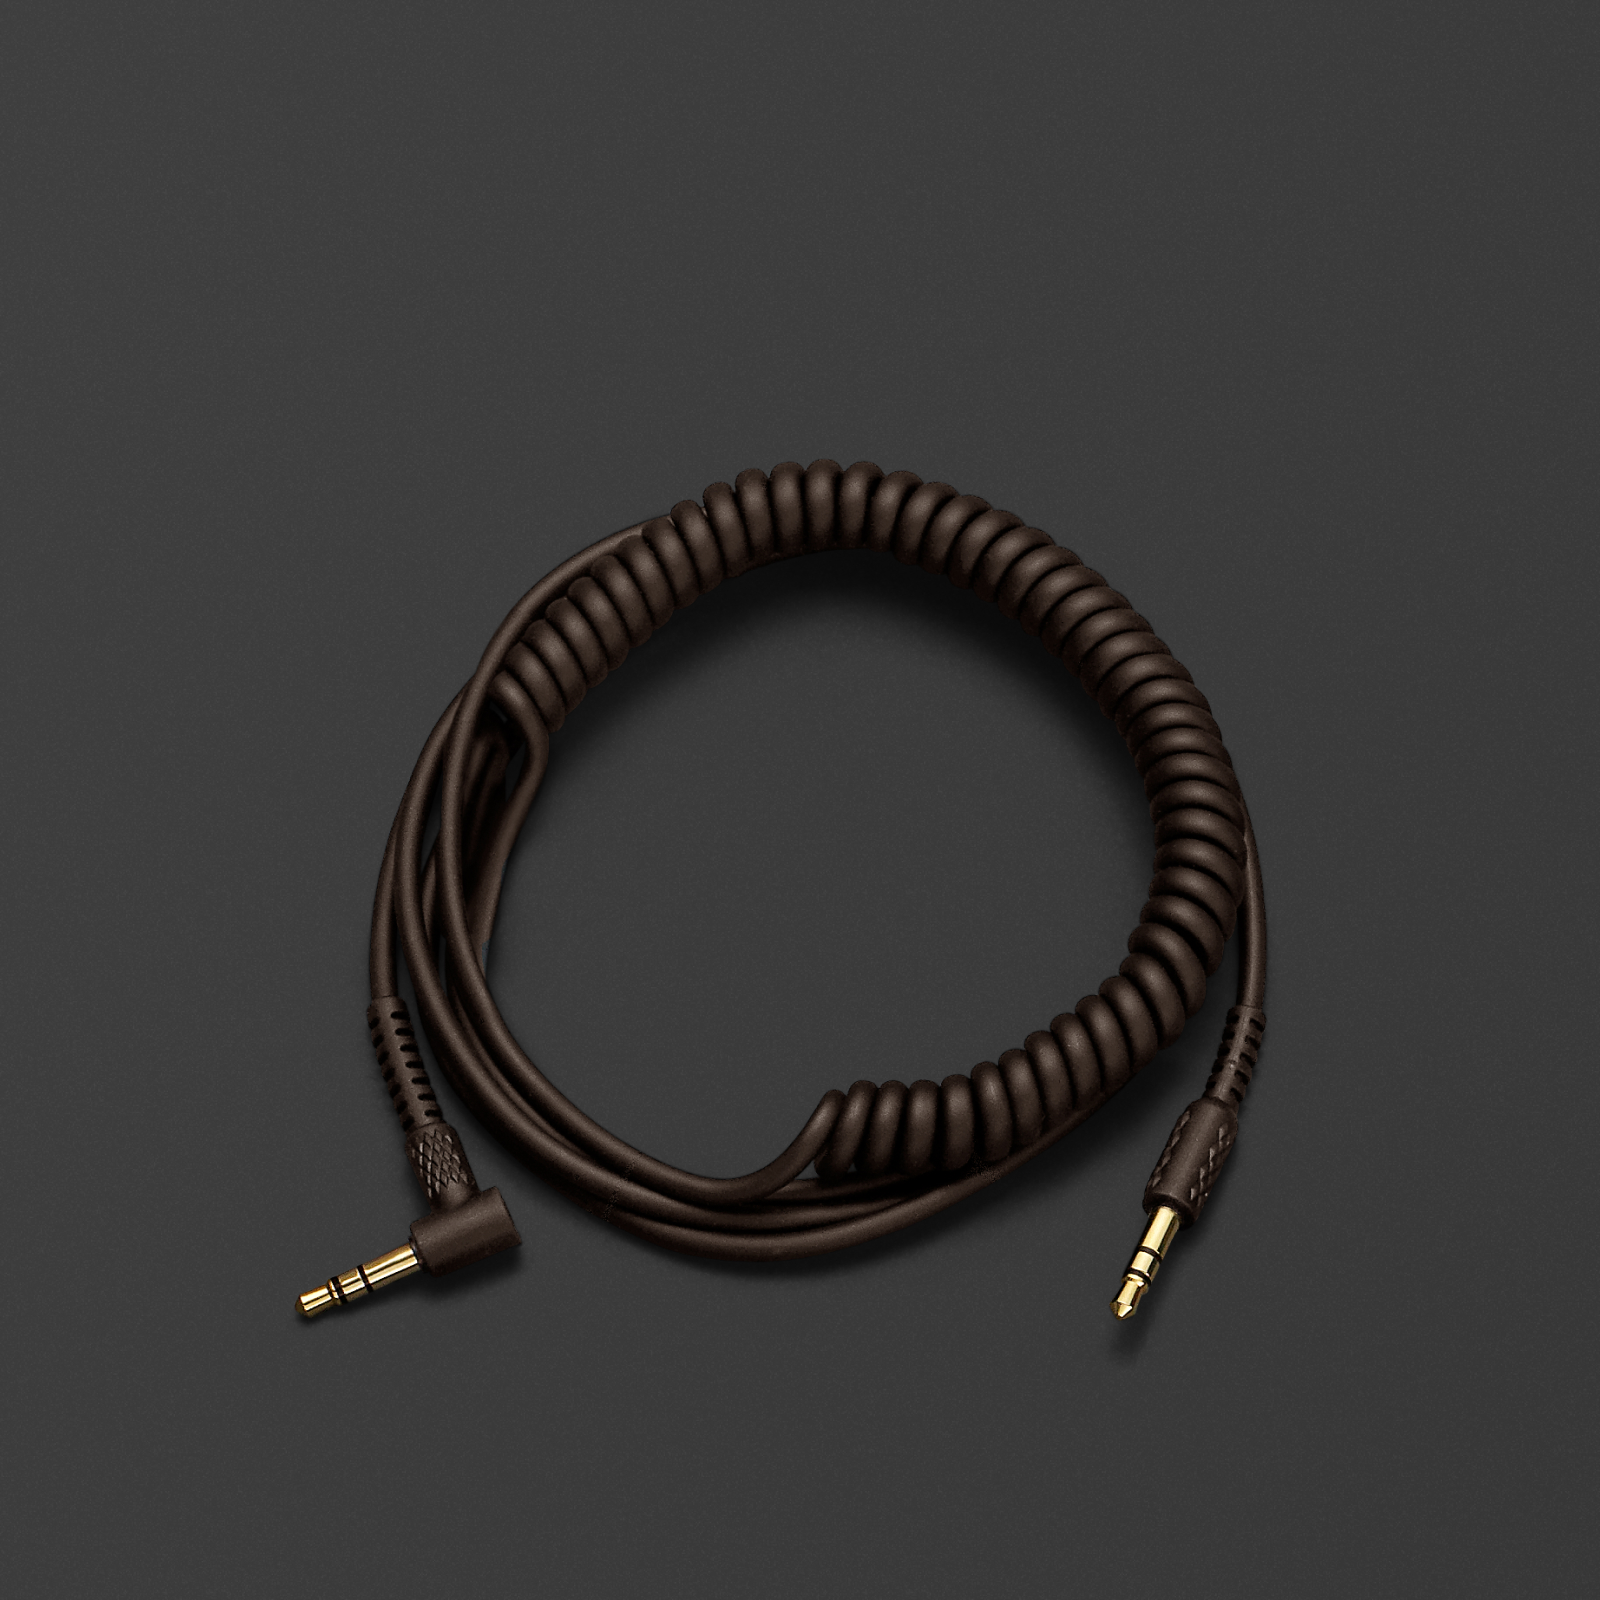 A brown coiled HEADPHONE AUDIO CABLE on a black surface. Brand Name: Marshall.